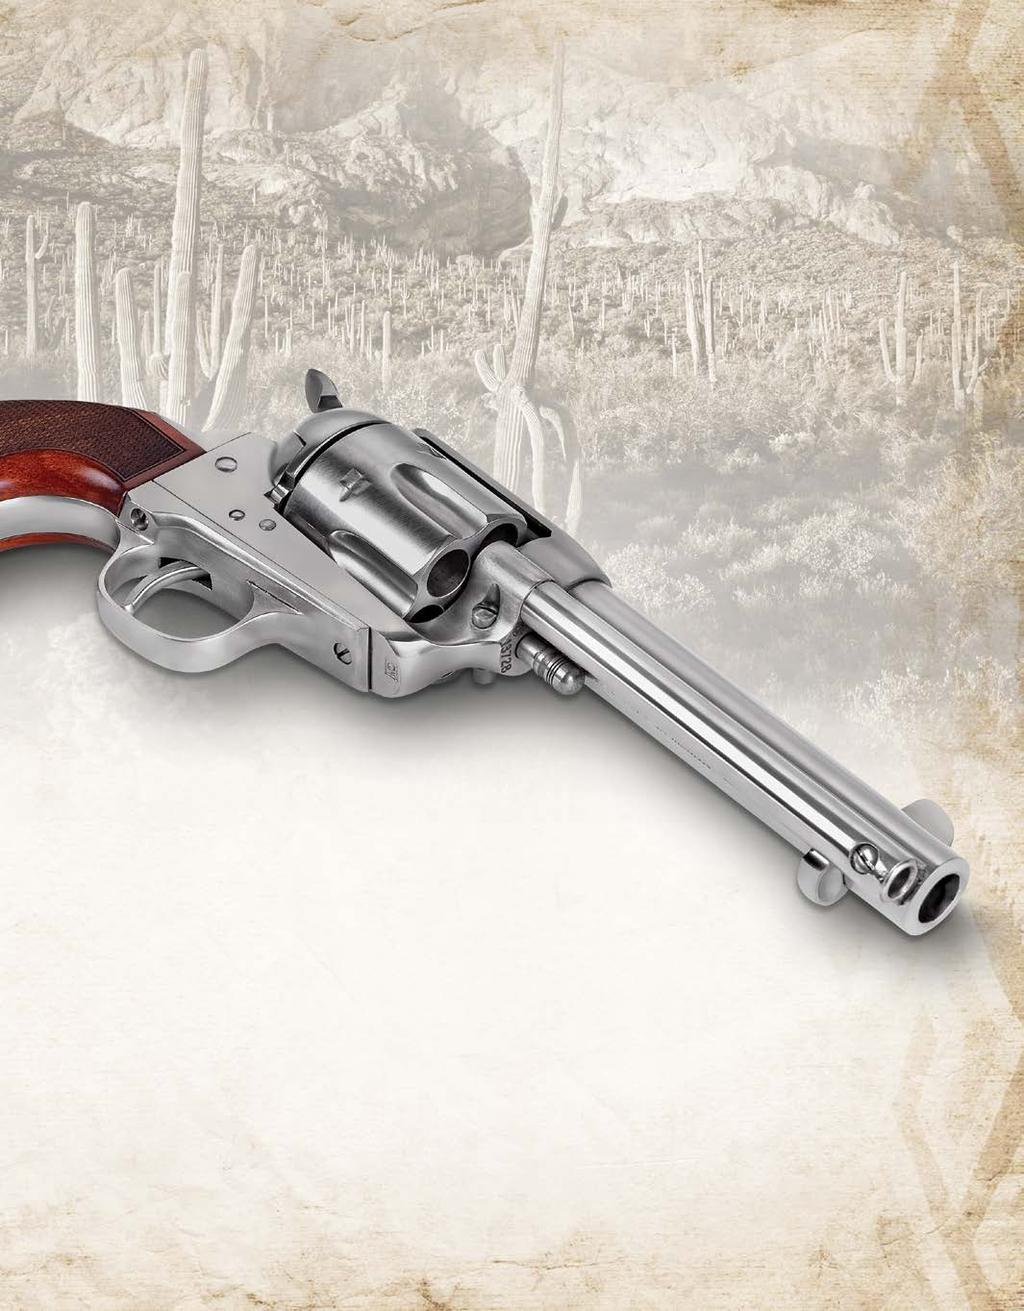 EL PATRÓN (See page 14) EXCLUSIVELY ON UBERTI FIREARMS IMPORTED BY STOEGER